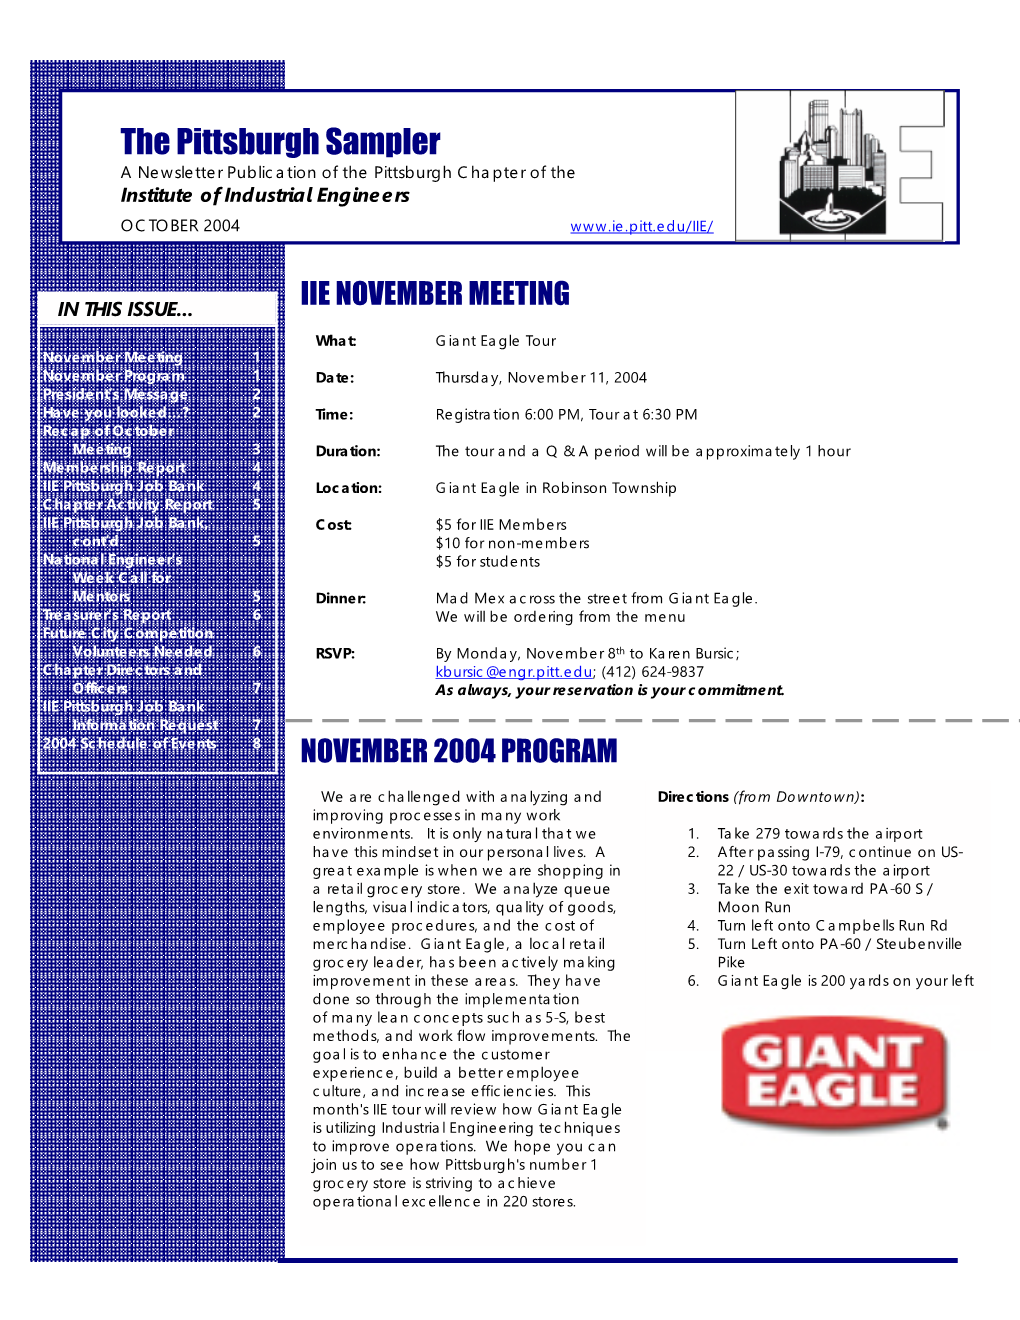 The Pittsburgh Sampler a Newsletter Publication of the Pittsburgh Chapter of the Institute of Industrial Engineers OCTOBER 2004